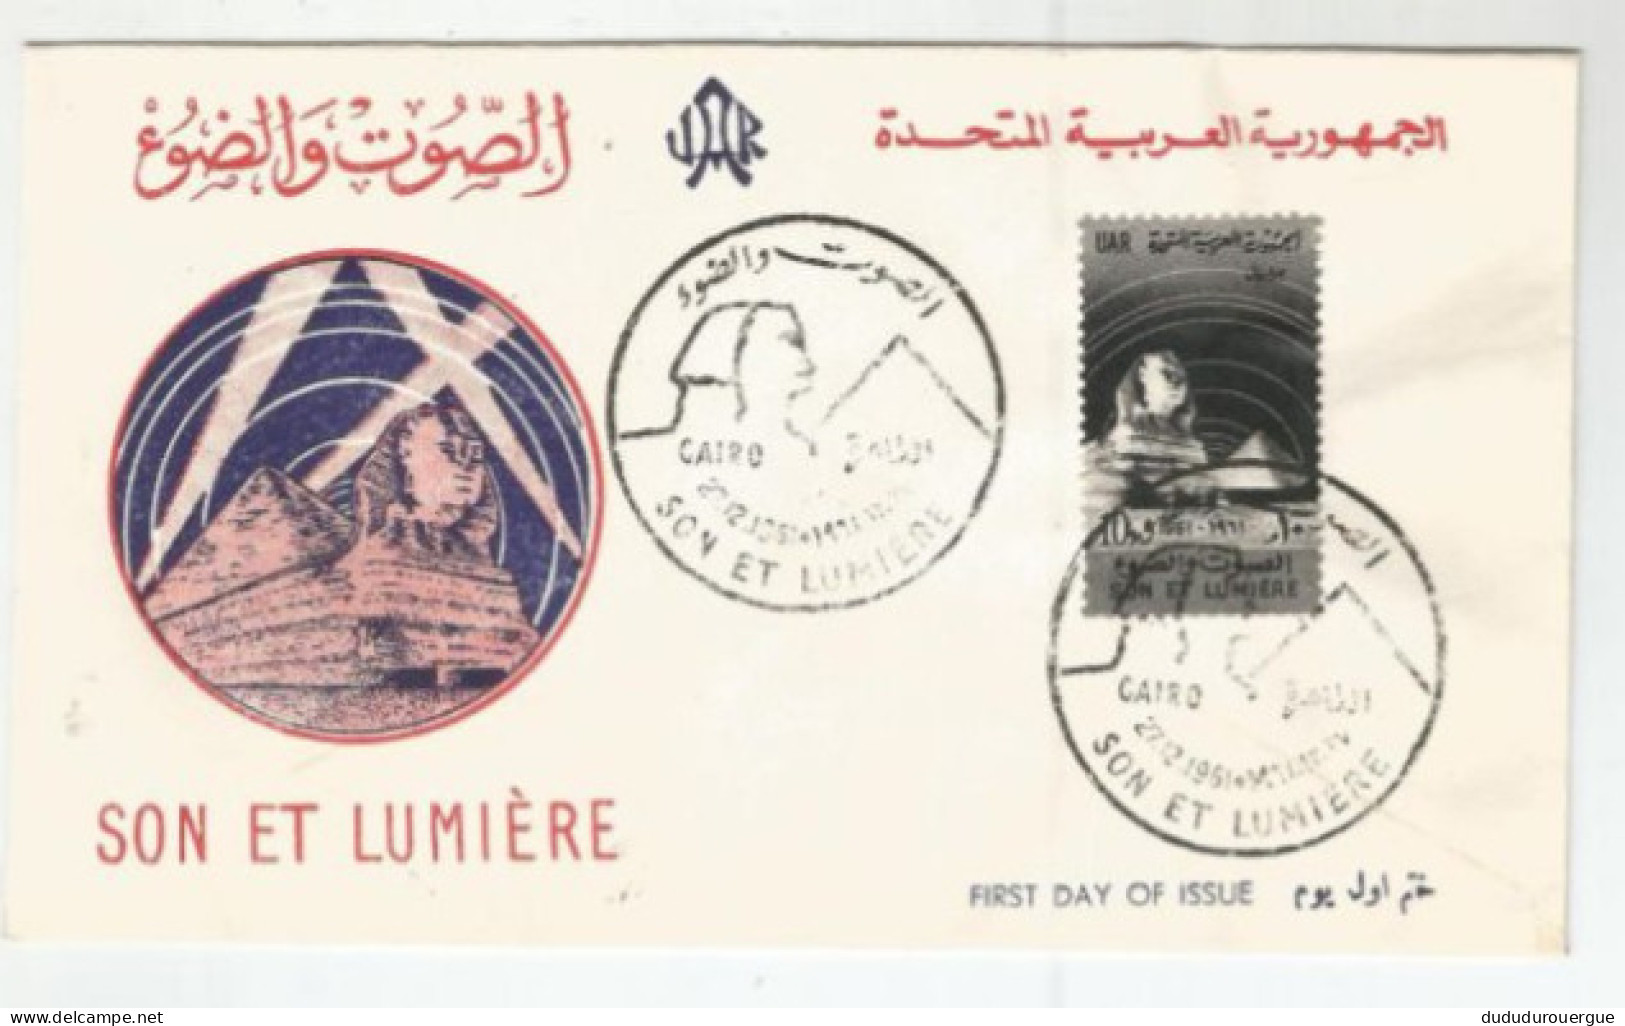 EGYPT , Son Et Lumiere , FIRST DAY OF ISSUE - Briefe U. Dokumente